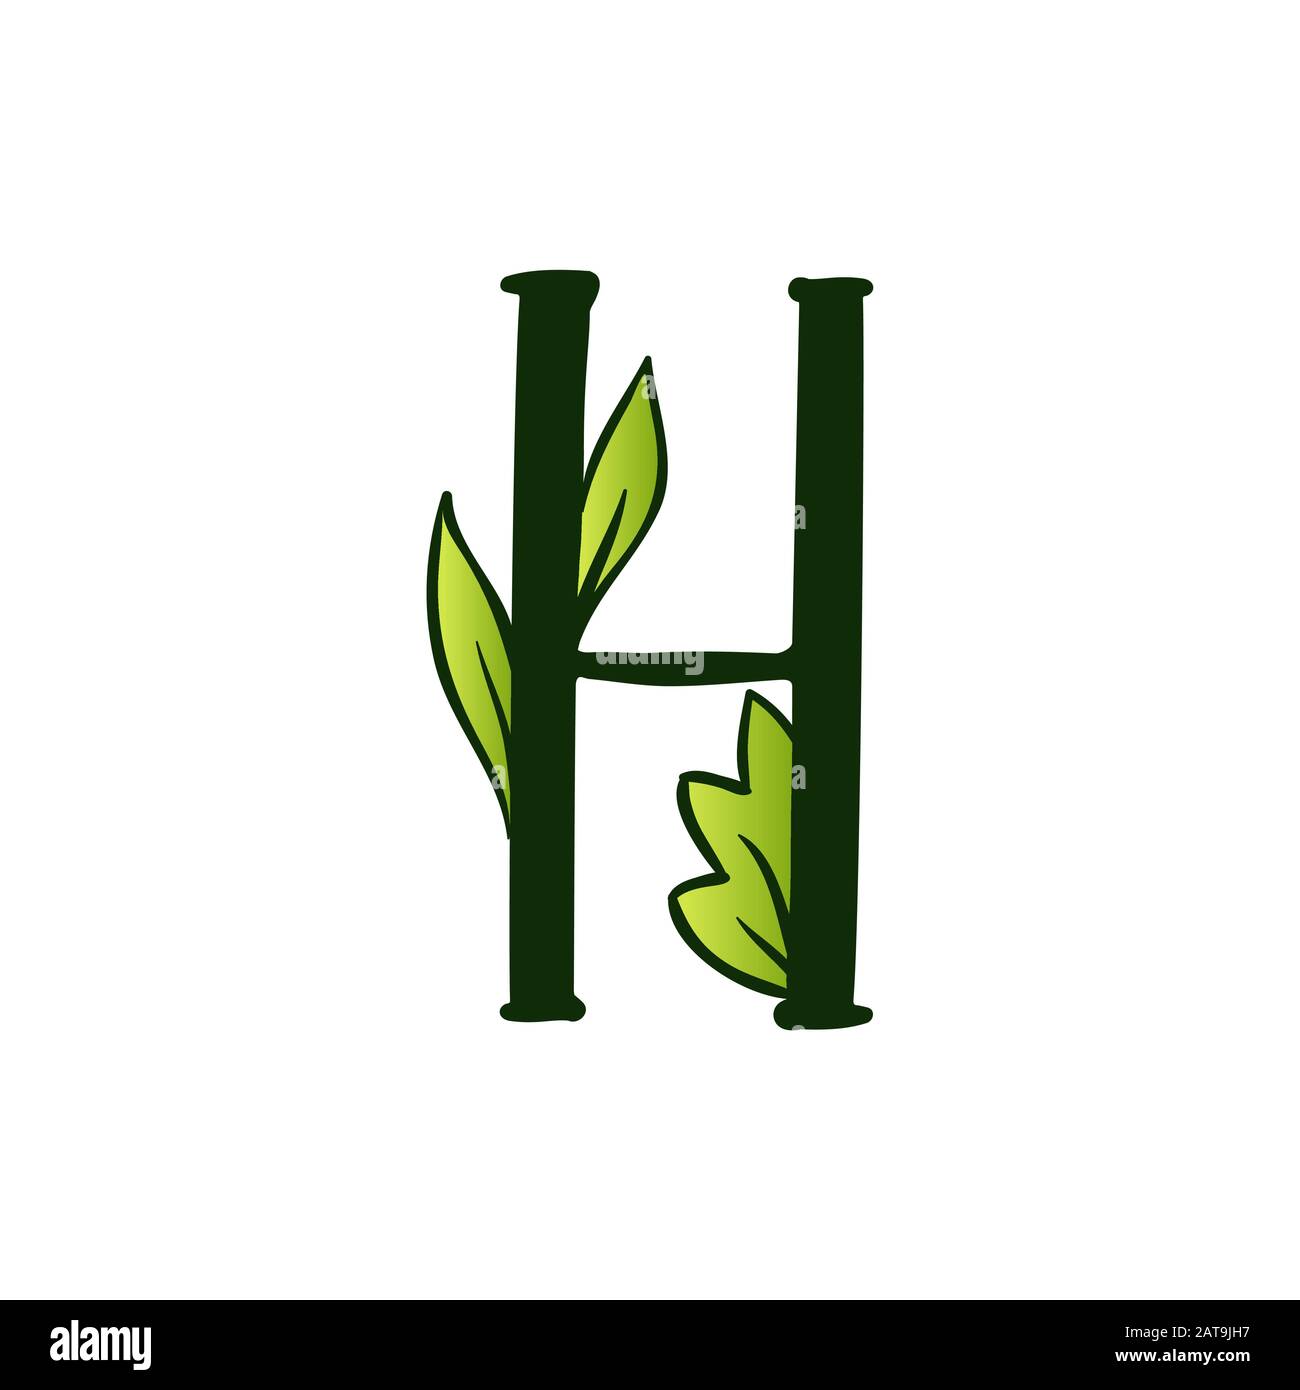 Green Doodling Eco Alphabet Letter H.Type with Leaves. Isolated Latin Uppercase. Typography Bold Spring Letter or Doodle abc Characters for Monogram Words and Logo. Stock Vector